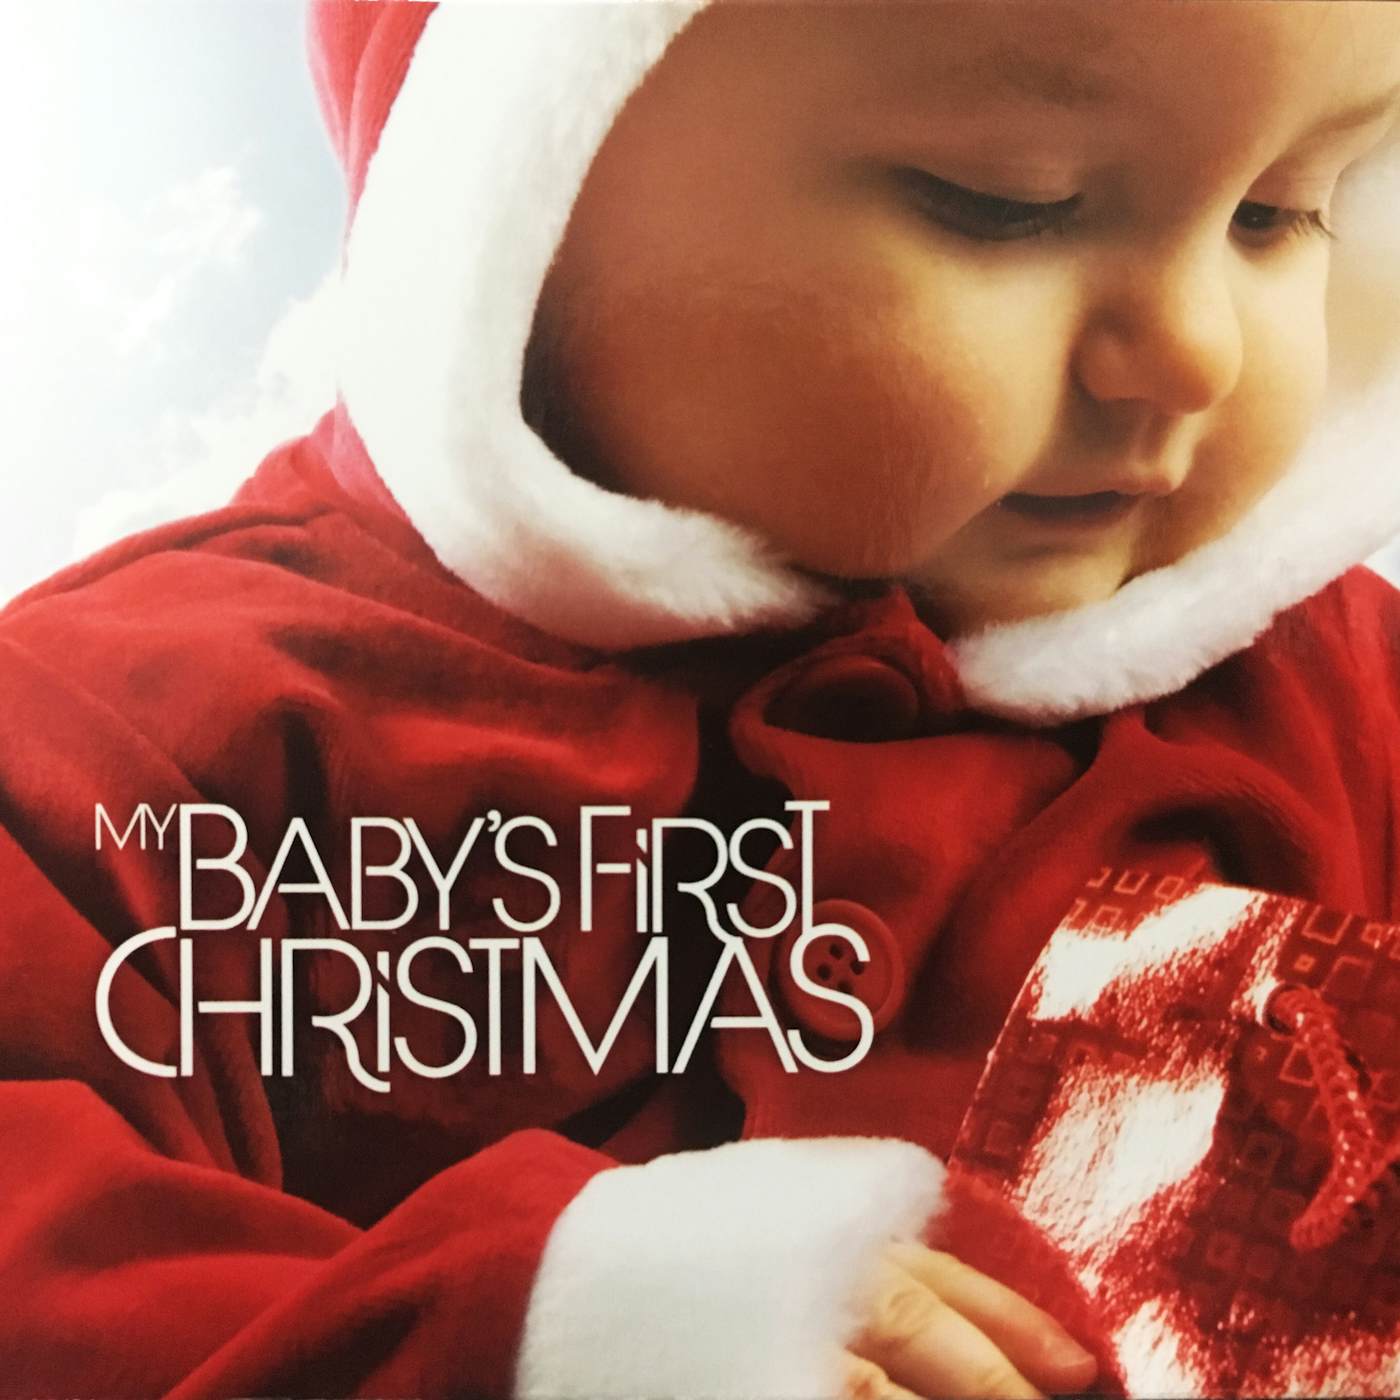 My First Christmas Photo Album - photo/video - by owner